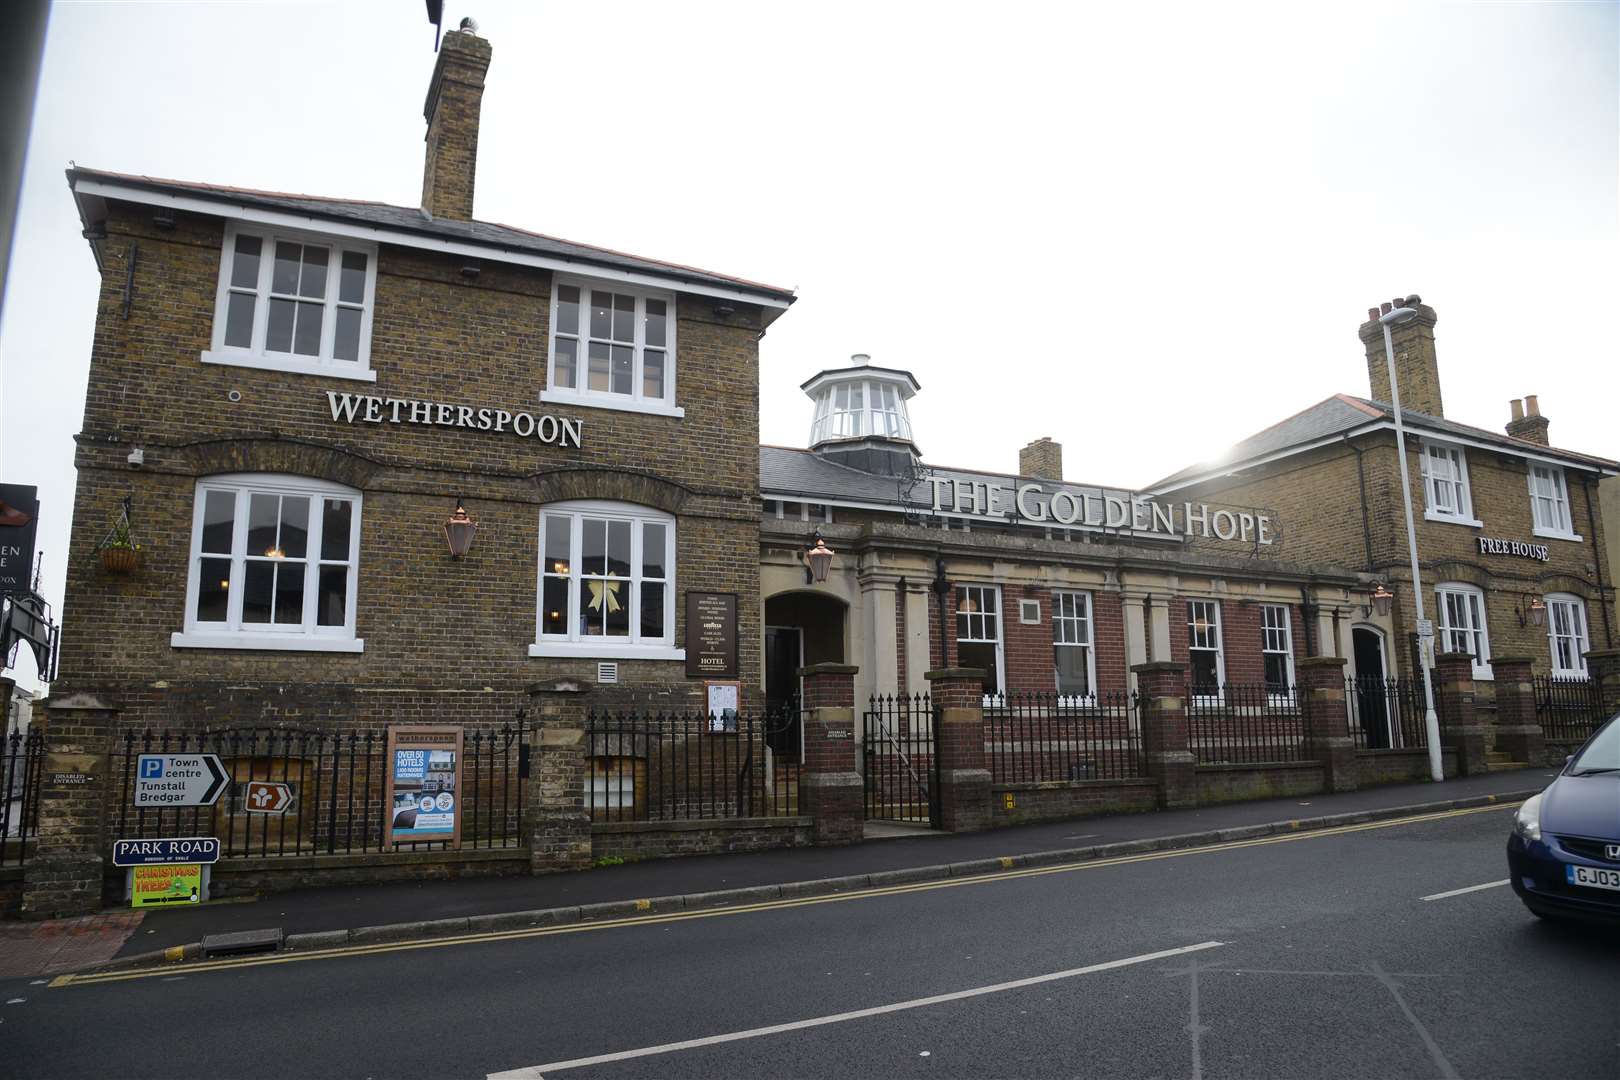 The Golden Hope opened as a Wetherspoon pub in 2015